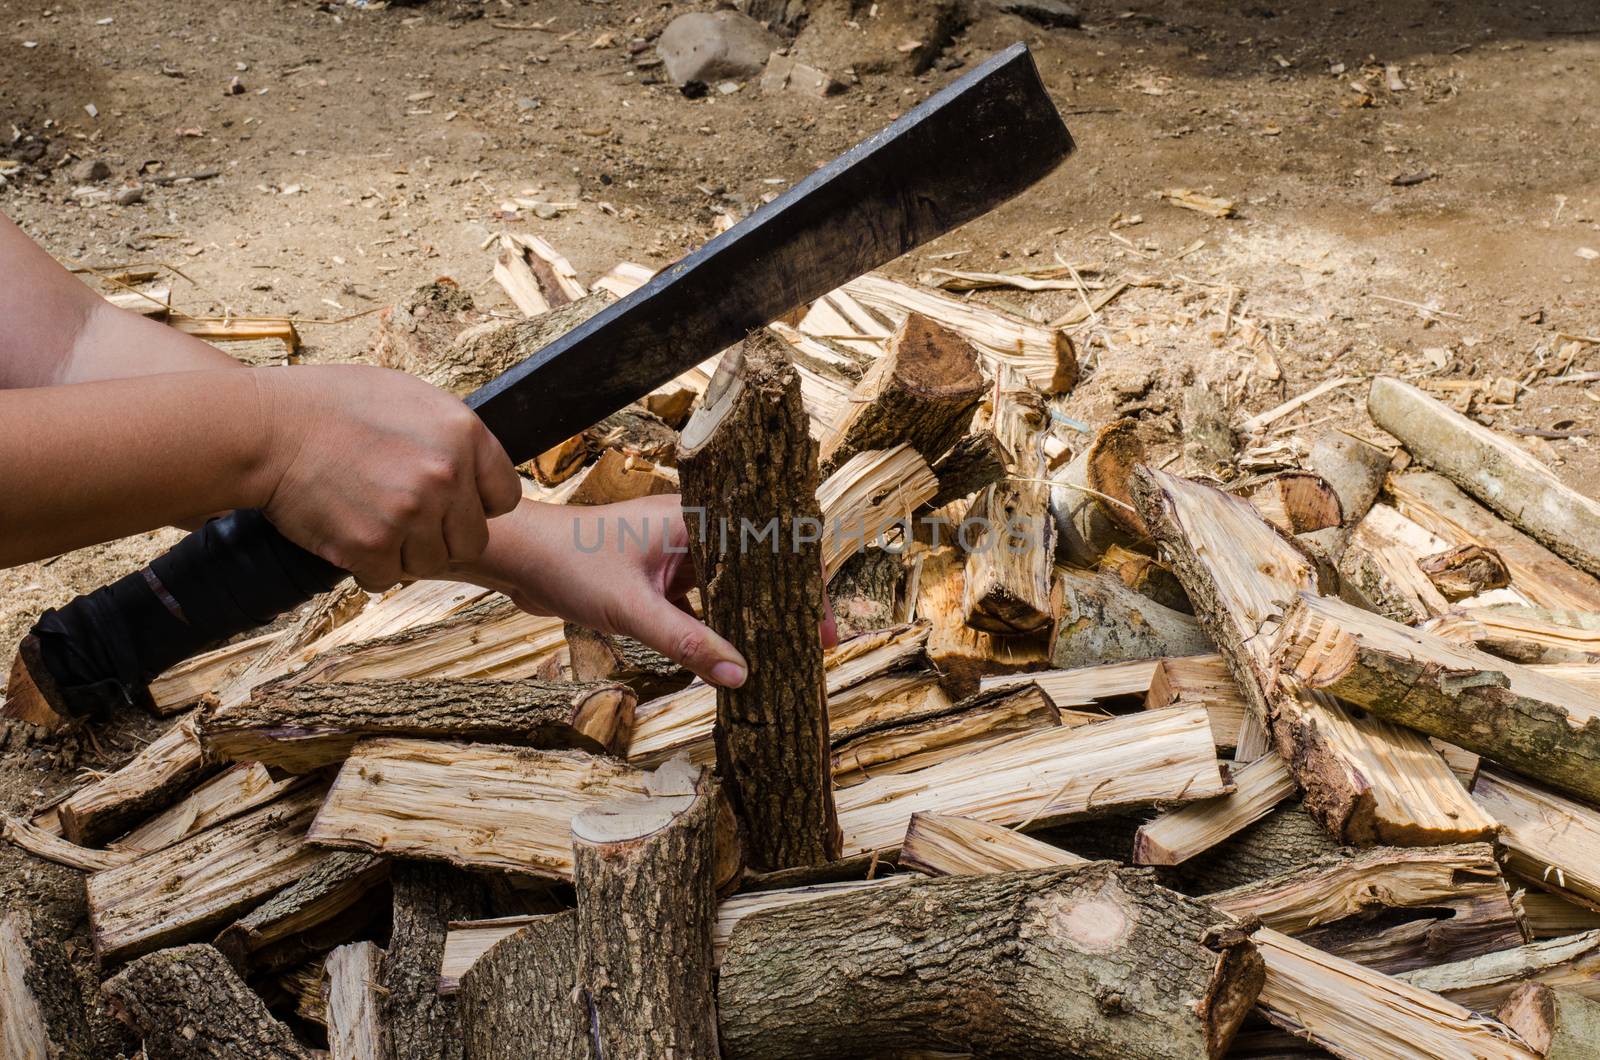 Holding a knife to cut firewood by photobyphotoboy